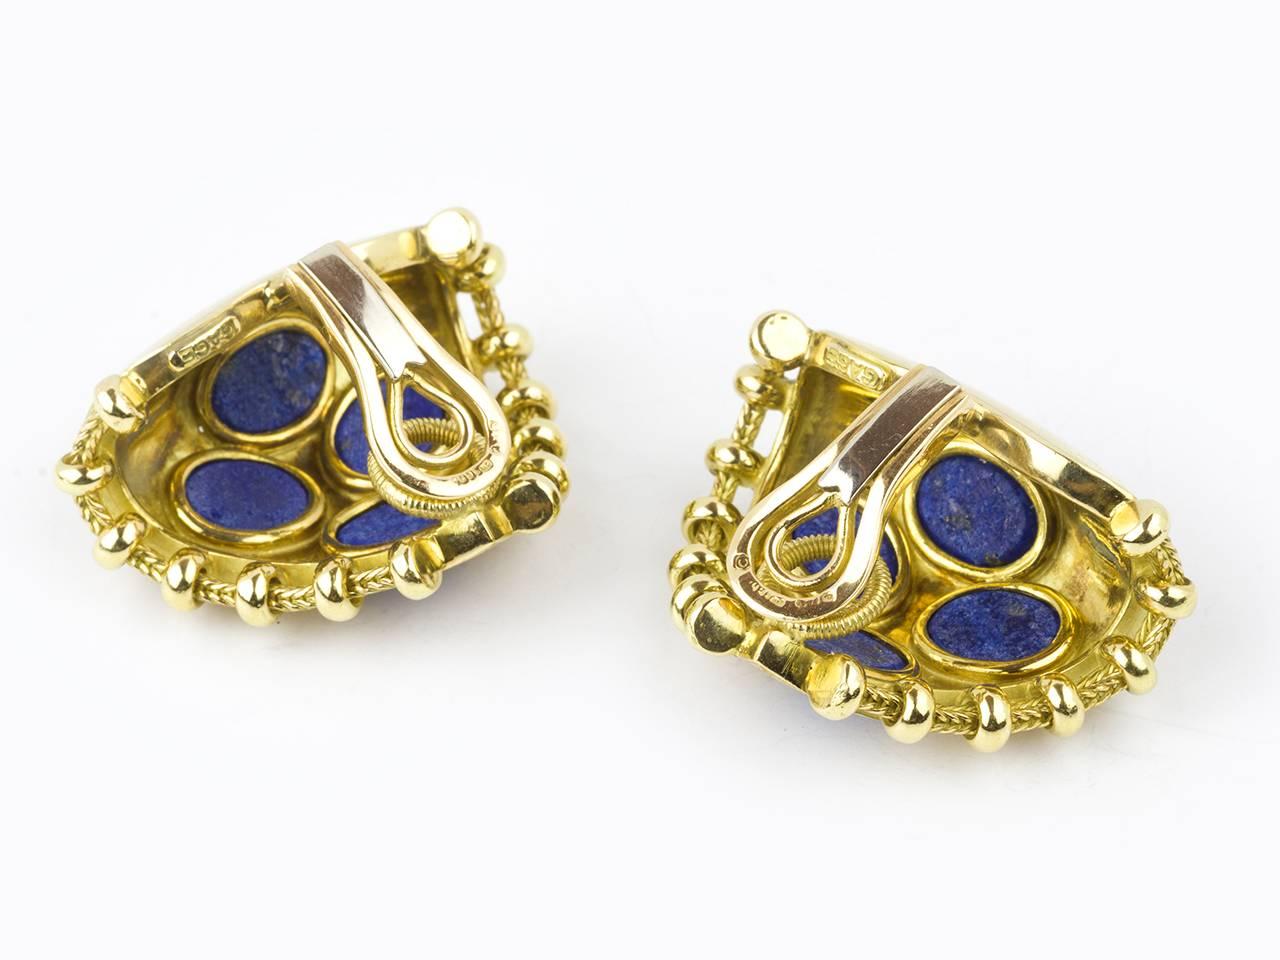 18k gold Trefoil earclips set with 3 lapis cabochons. Signed GAGE, English marks.